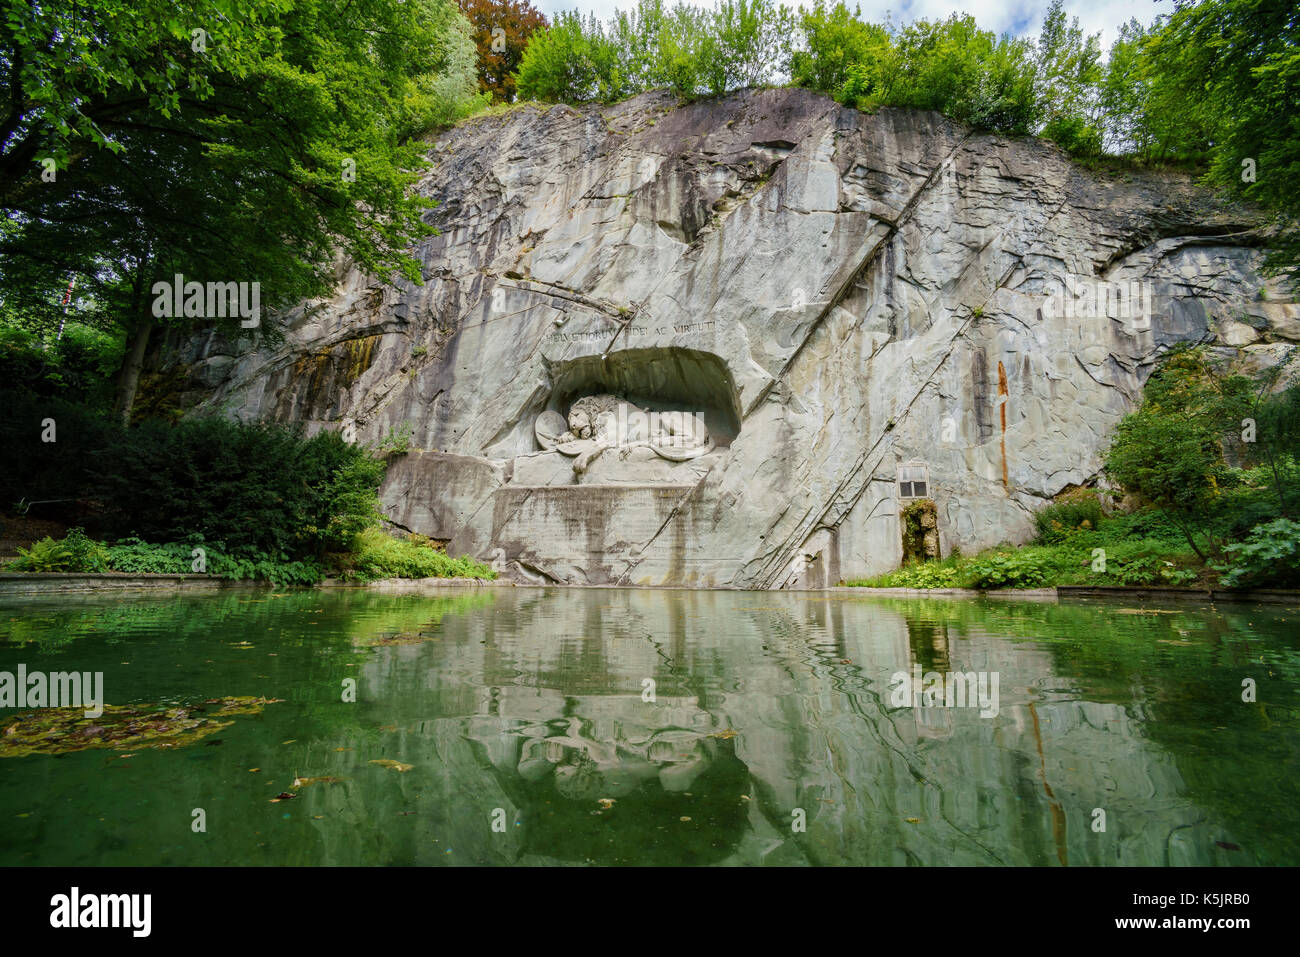 The famous Lion Monument at Lucerne (Luzern), Switzerland Stock Photo